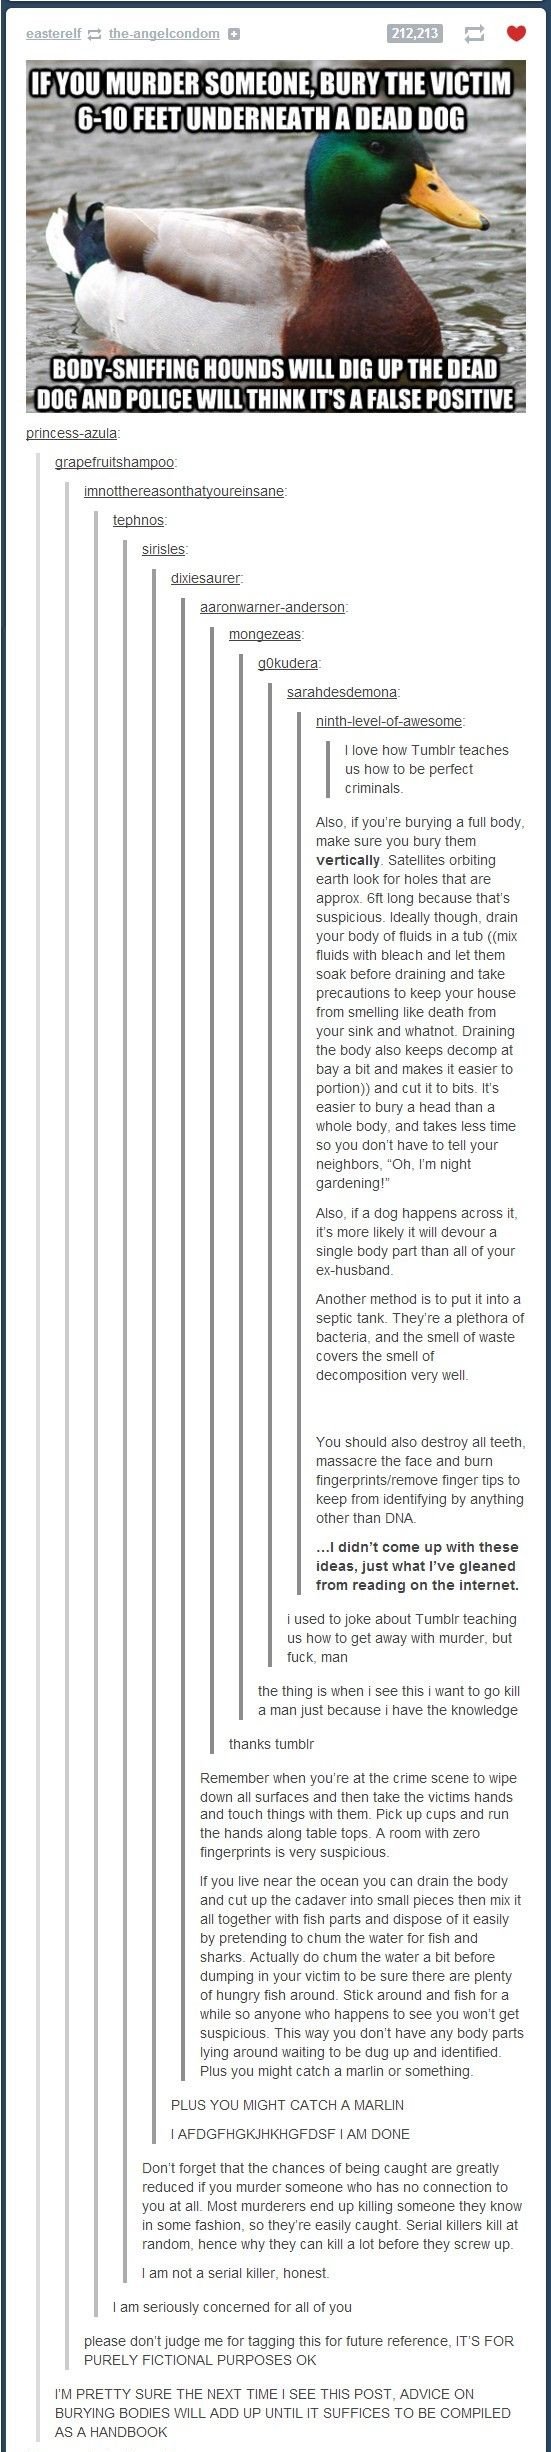 tumblr- a site that teaches you about murder